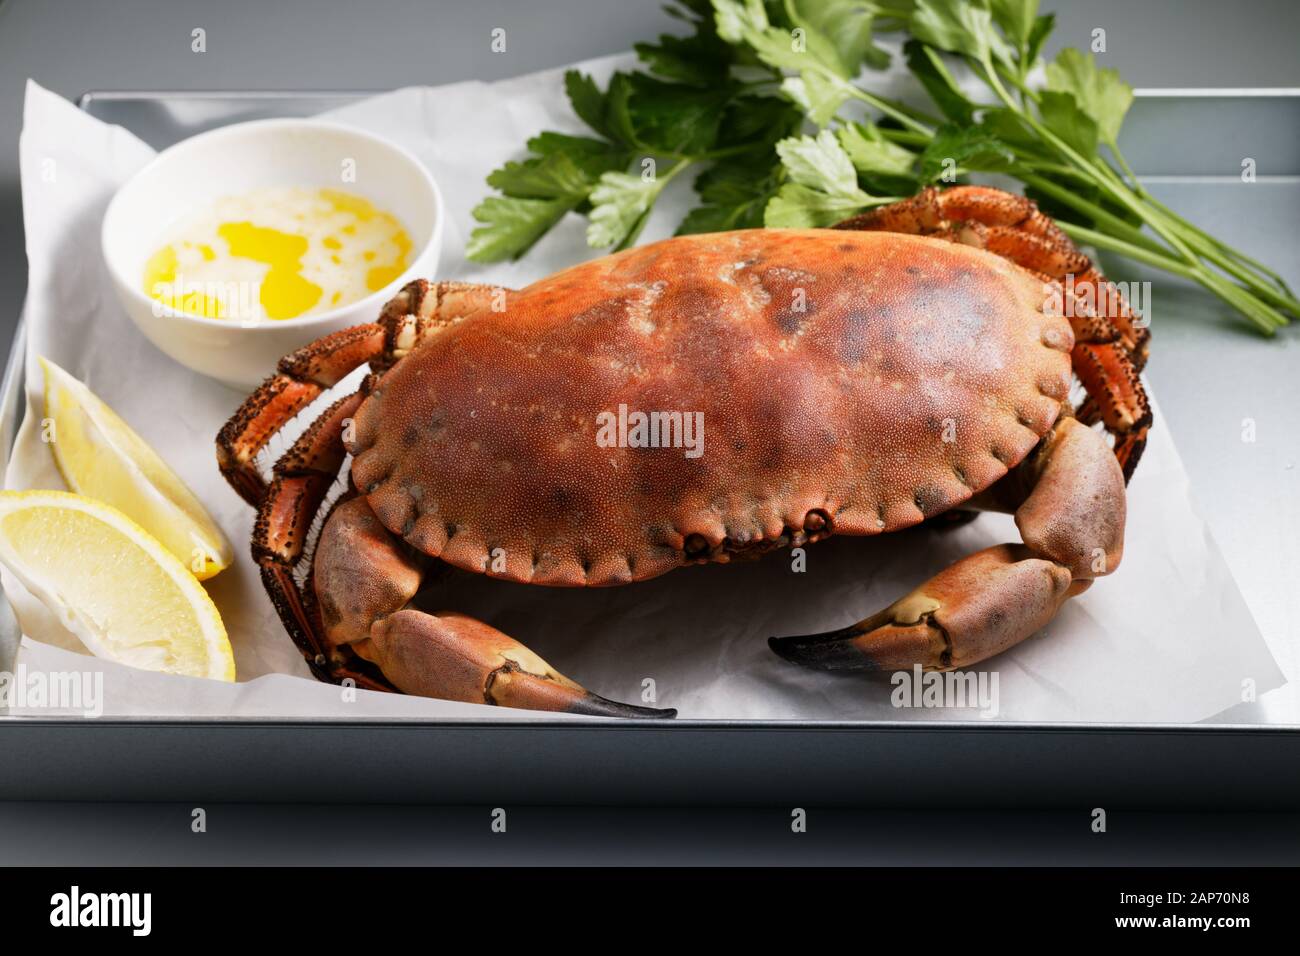 Prepared Swedish crab served with lemon, parsley, and drawn butter Stock Photo